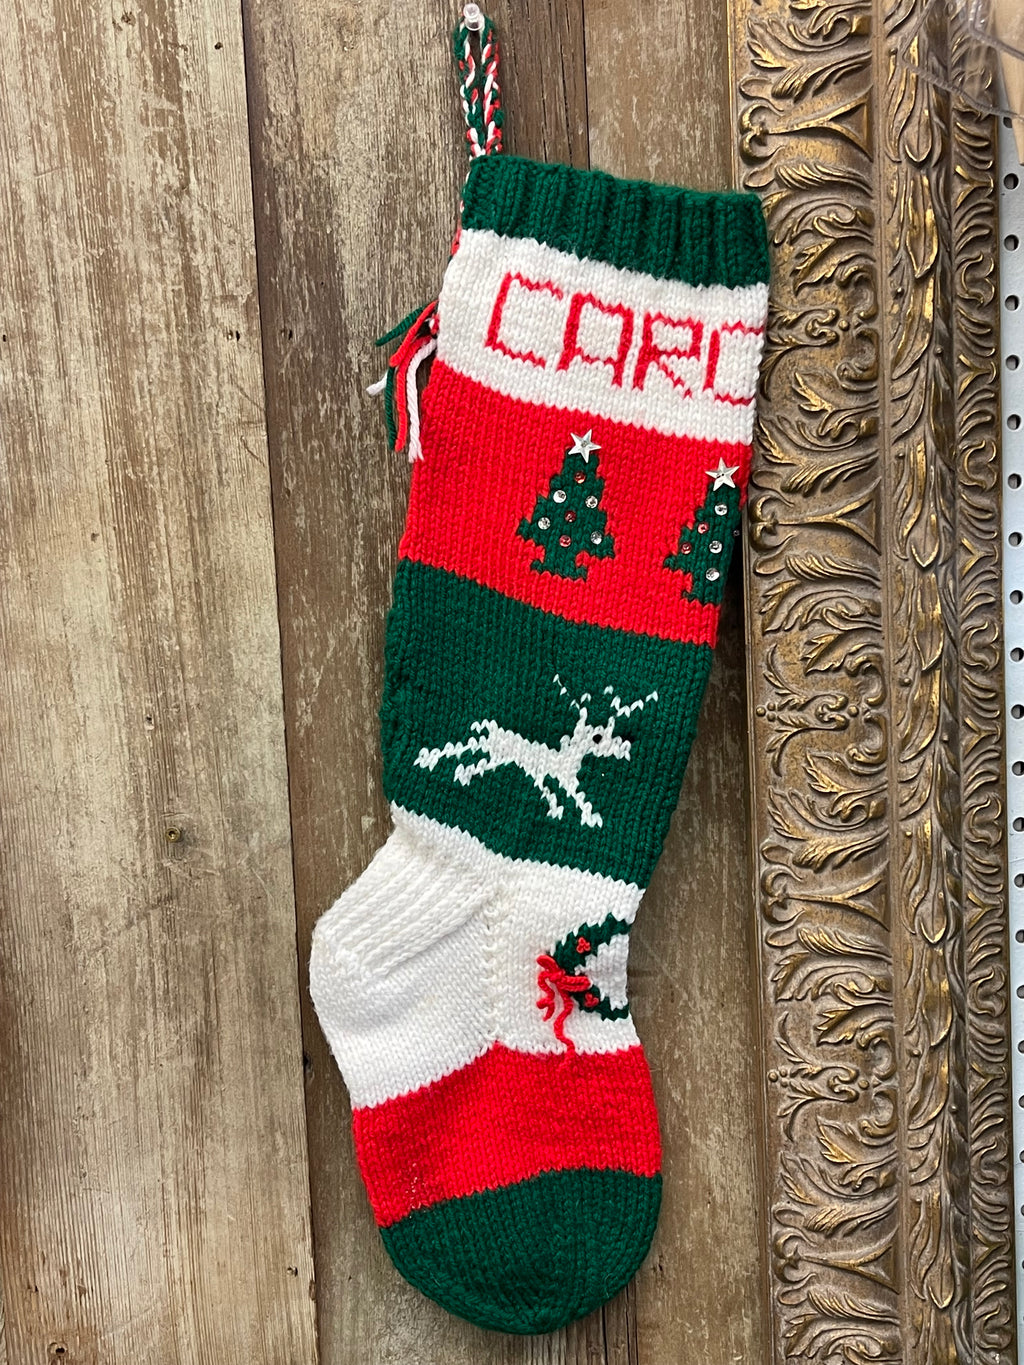 Knit a Classic Christmas Stocking